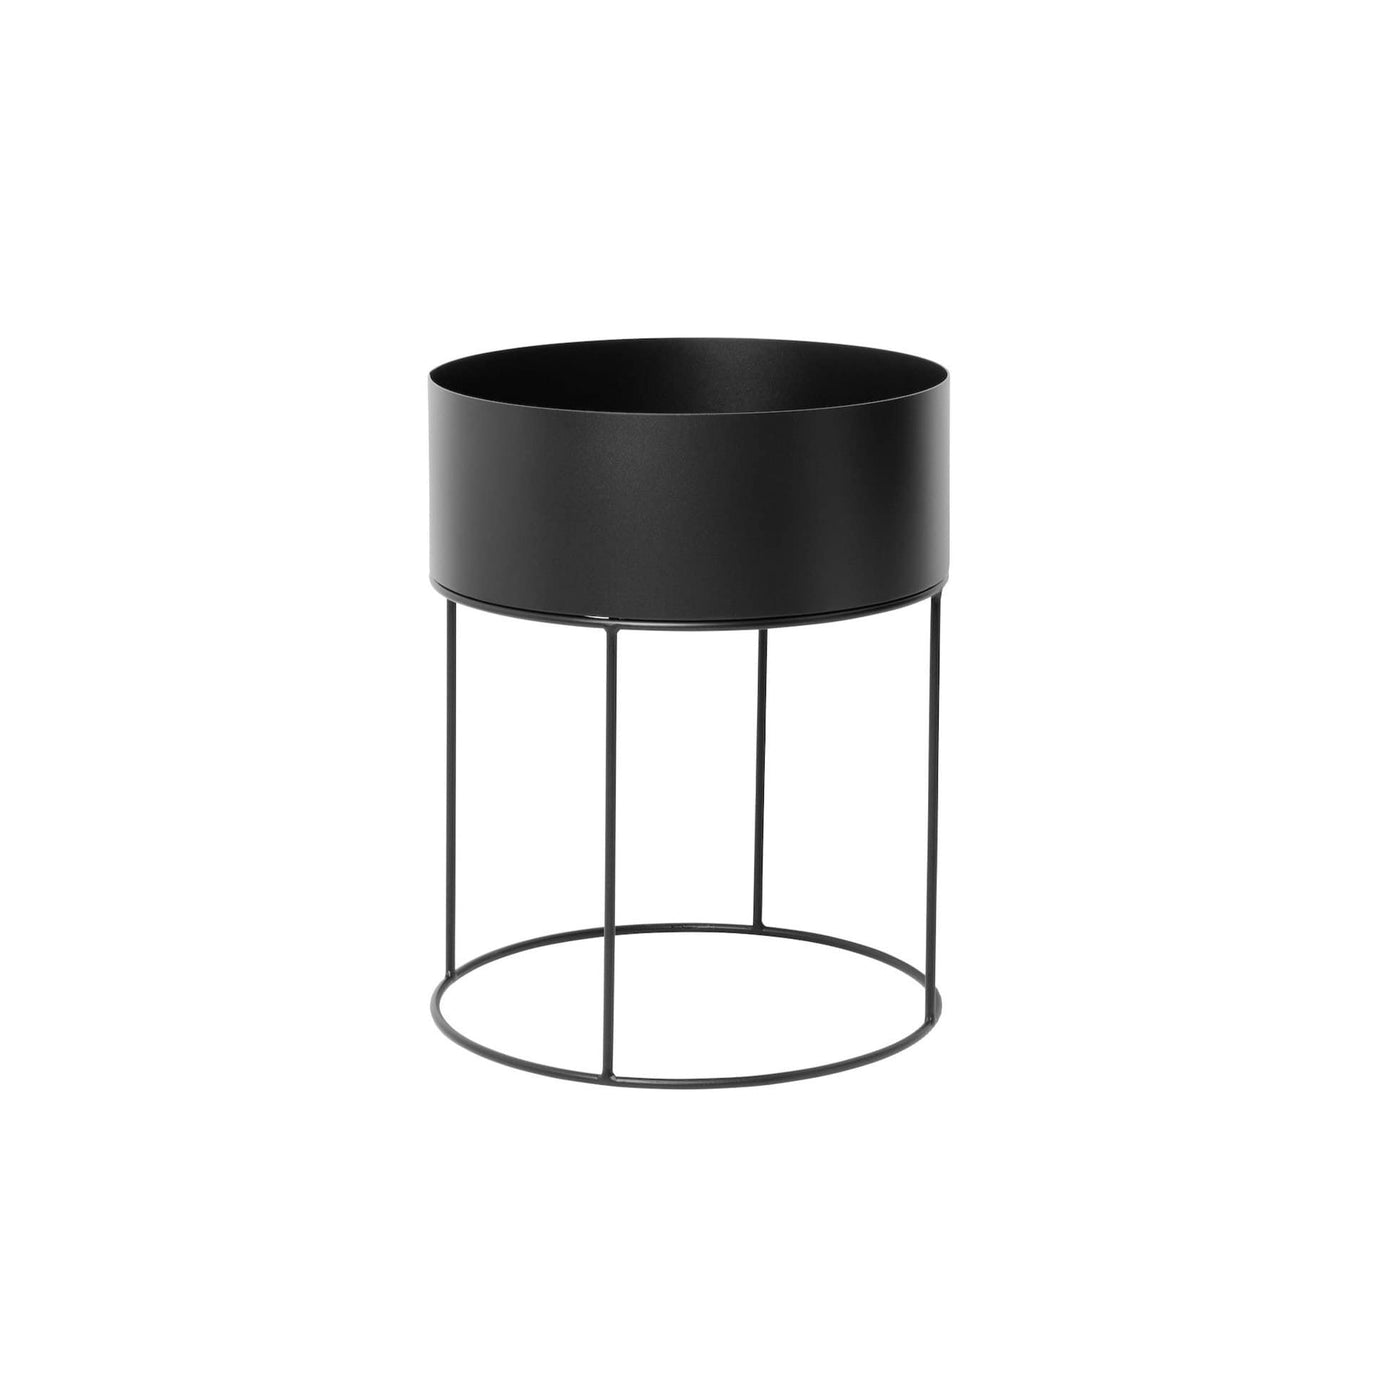 Ferm Living Plant Box round. Available from someday designs. #colour_black